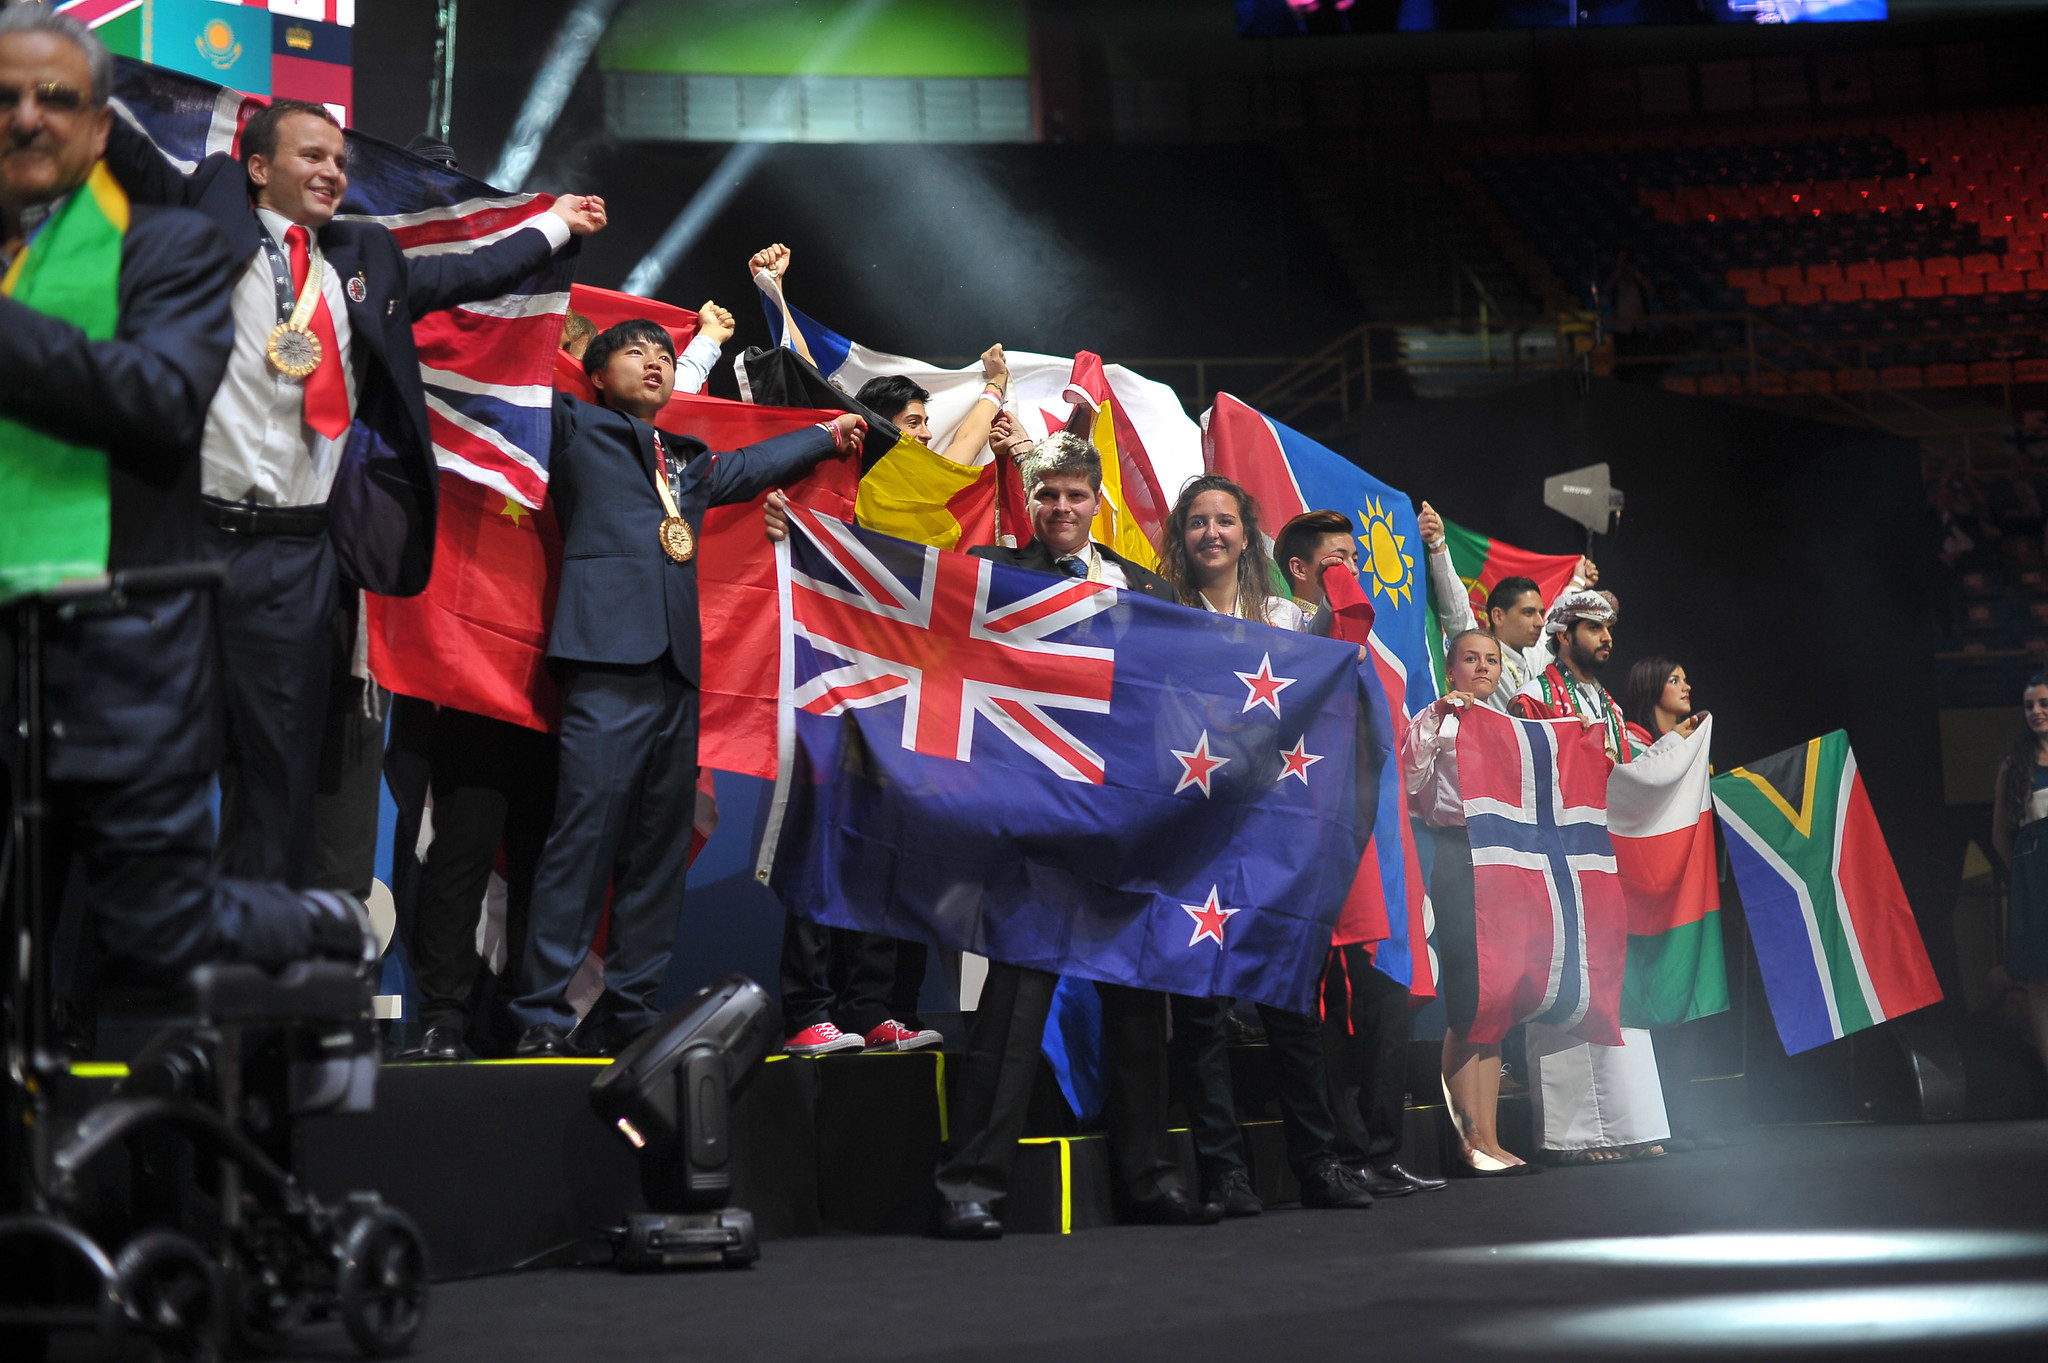 WorldSkills New Zealand has been promoting and benchmarking skills excellence and championing vocational skill competitions since 1986